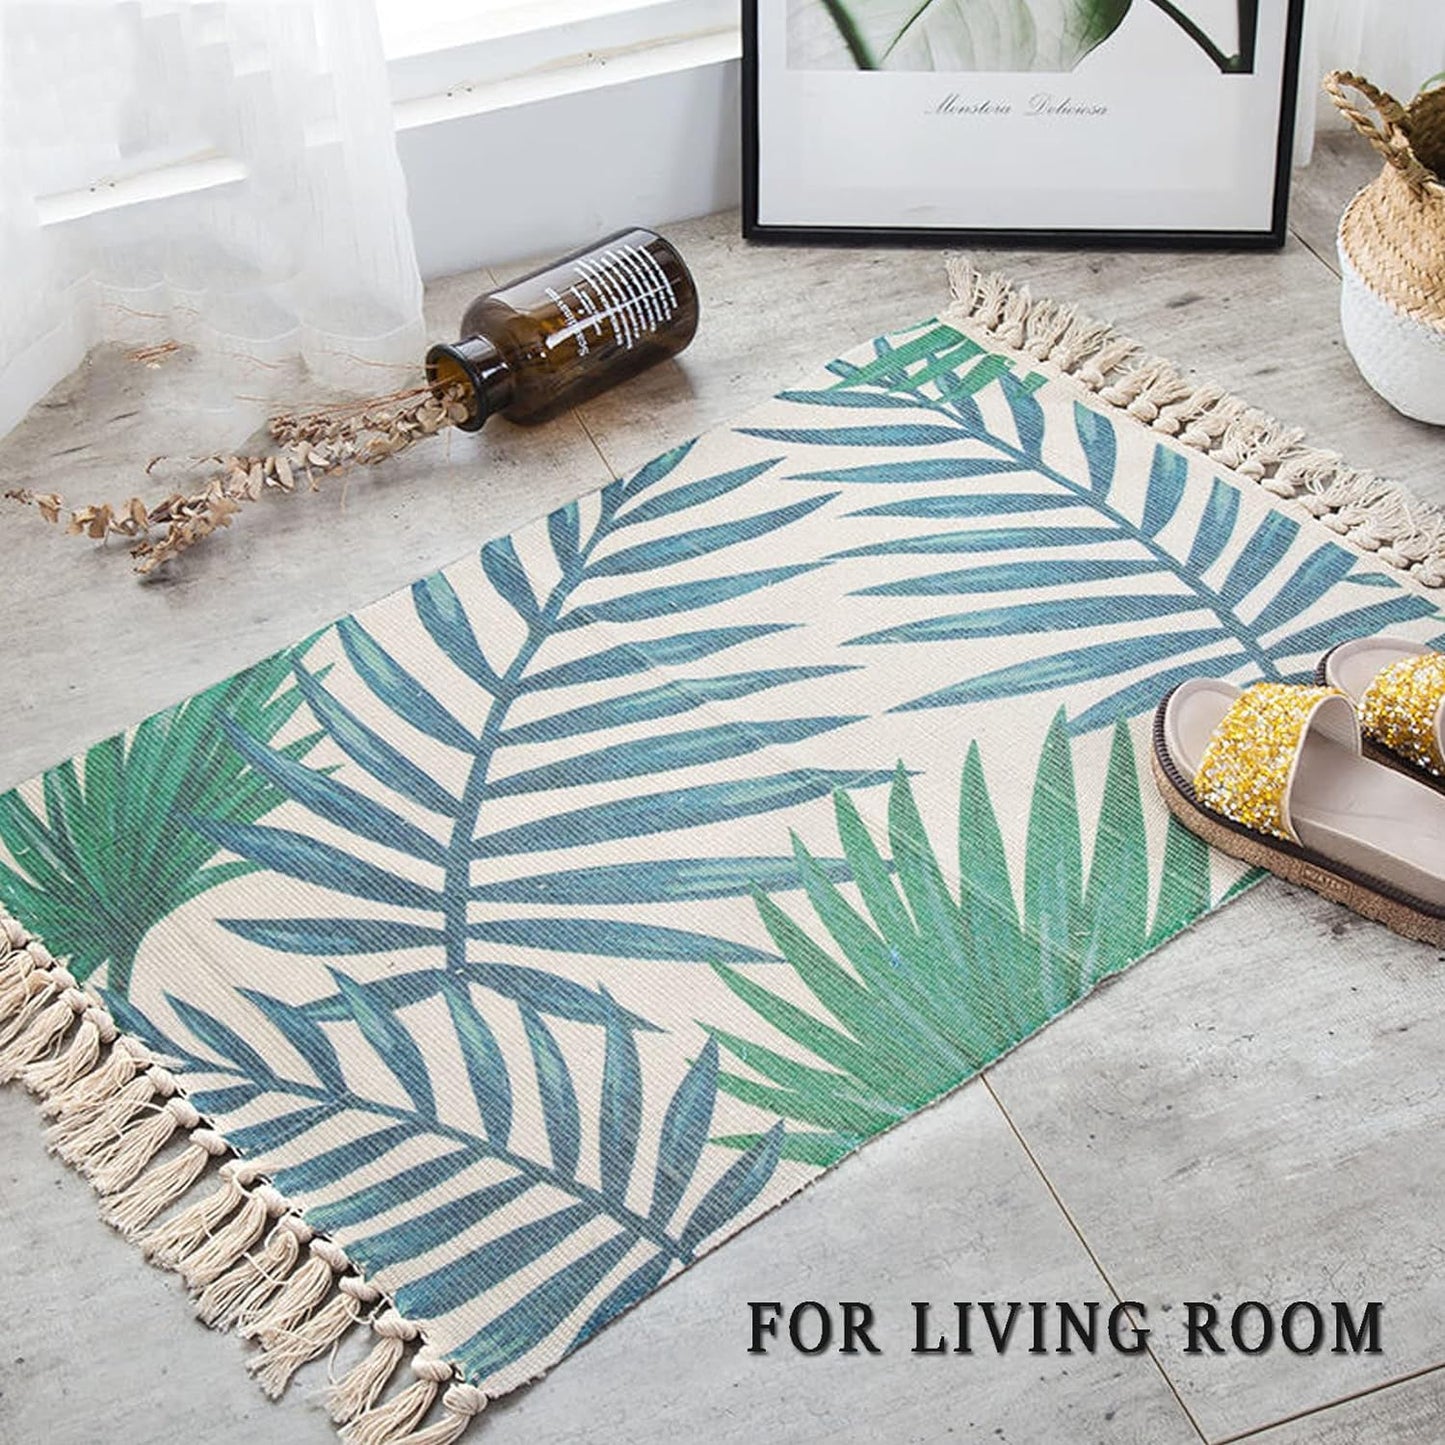 Handwoven Leaf Cotton Dhurrie | Floormat | 33X21 Inches